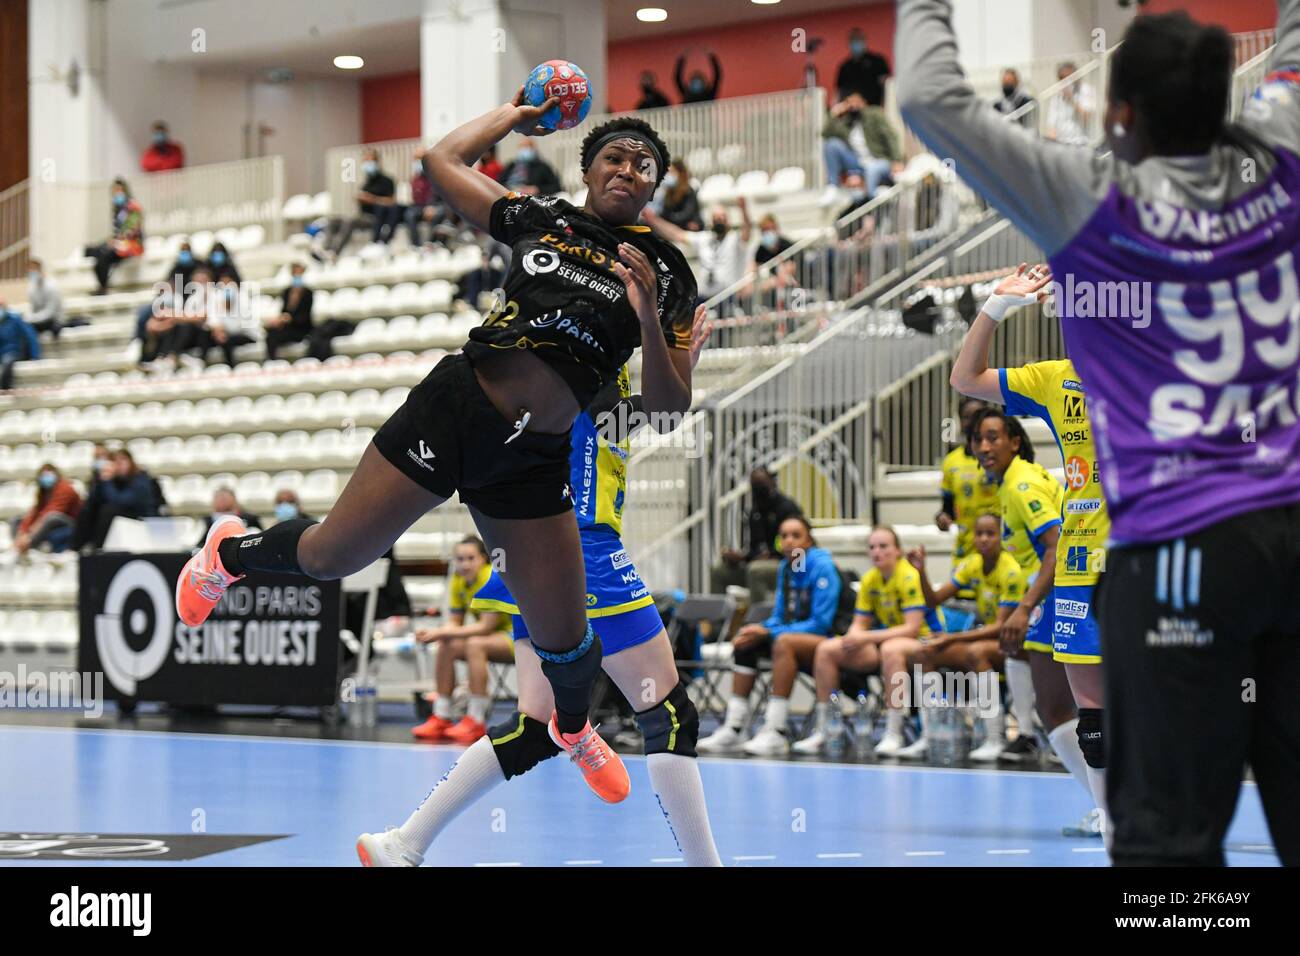 Paris, France. 28th April, 2021. Adja Ouattara during the Women's French championship, Ligue Butagaz Energie, play-offs Day 5 handball match between Paris 92 and Metz HB on April 28, 2021 at Palais des Sports Robert Charpentier in Issy-les-Moulineaux, France - Credit: Victor Joly/Alamy Live News Stock Photo